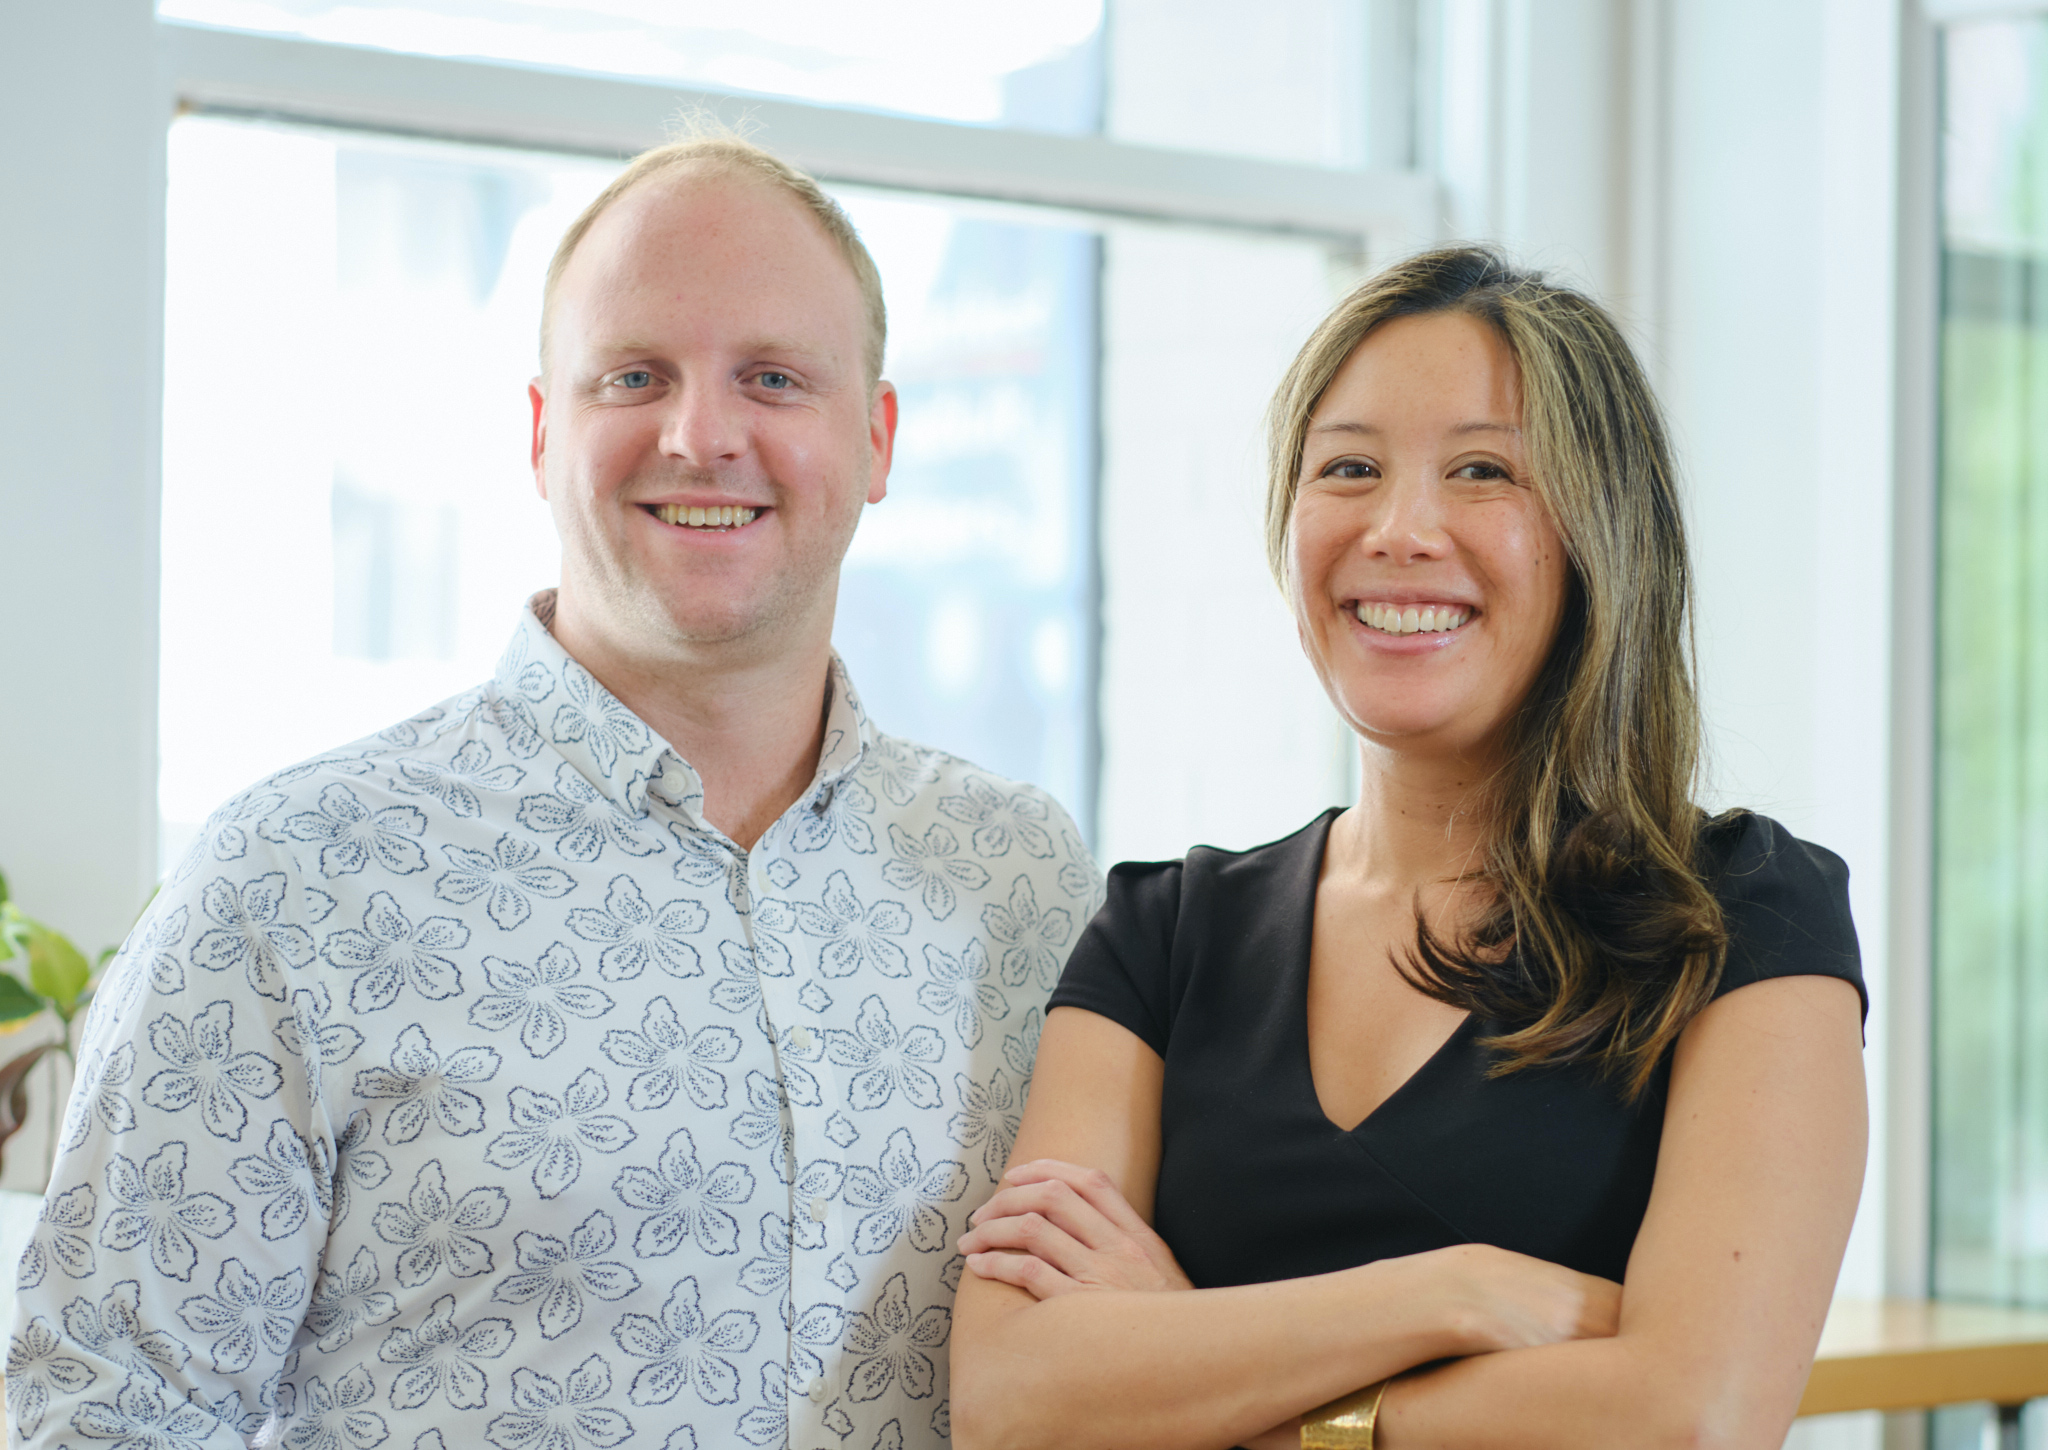 Retail Zipline co-founders, Jeremy Baker and Melissa Wong